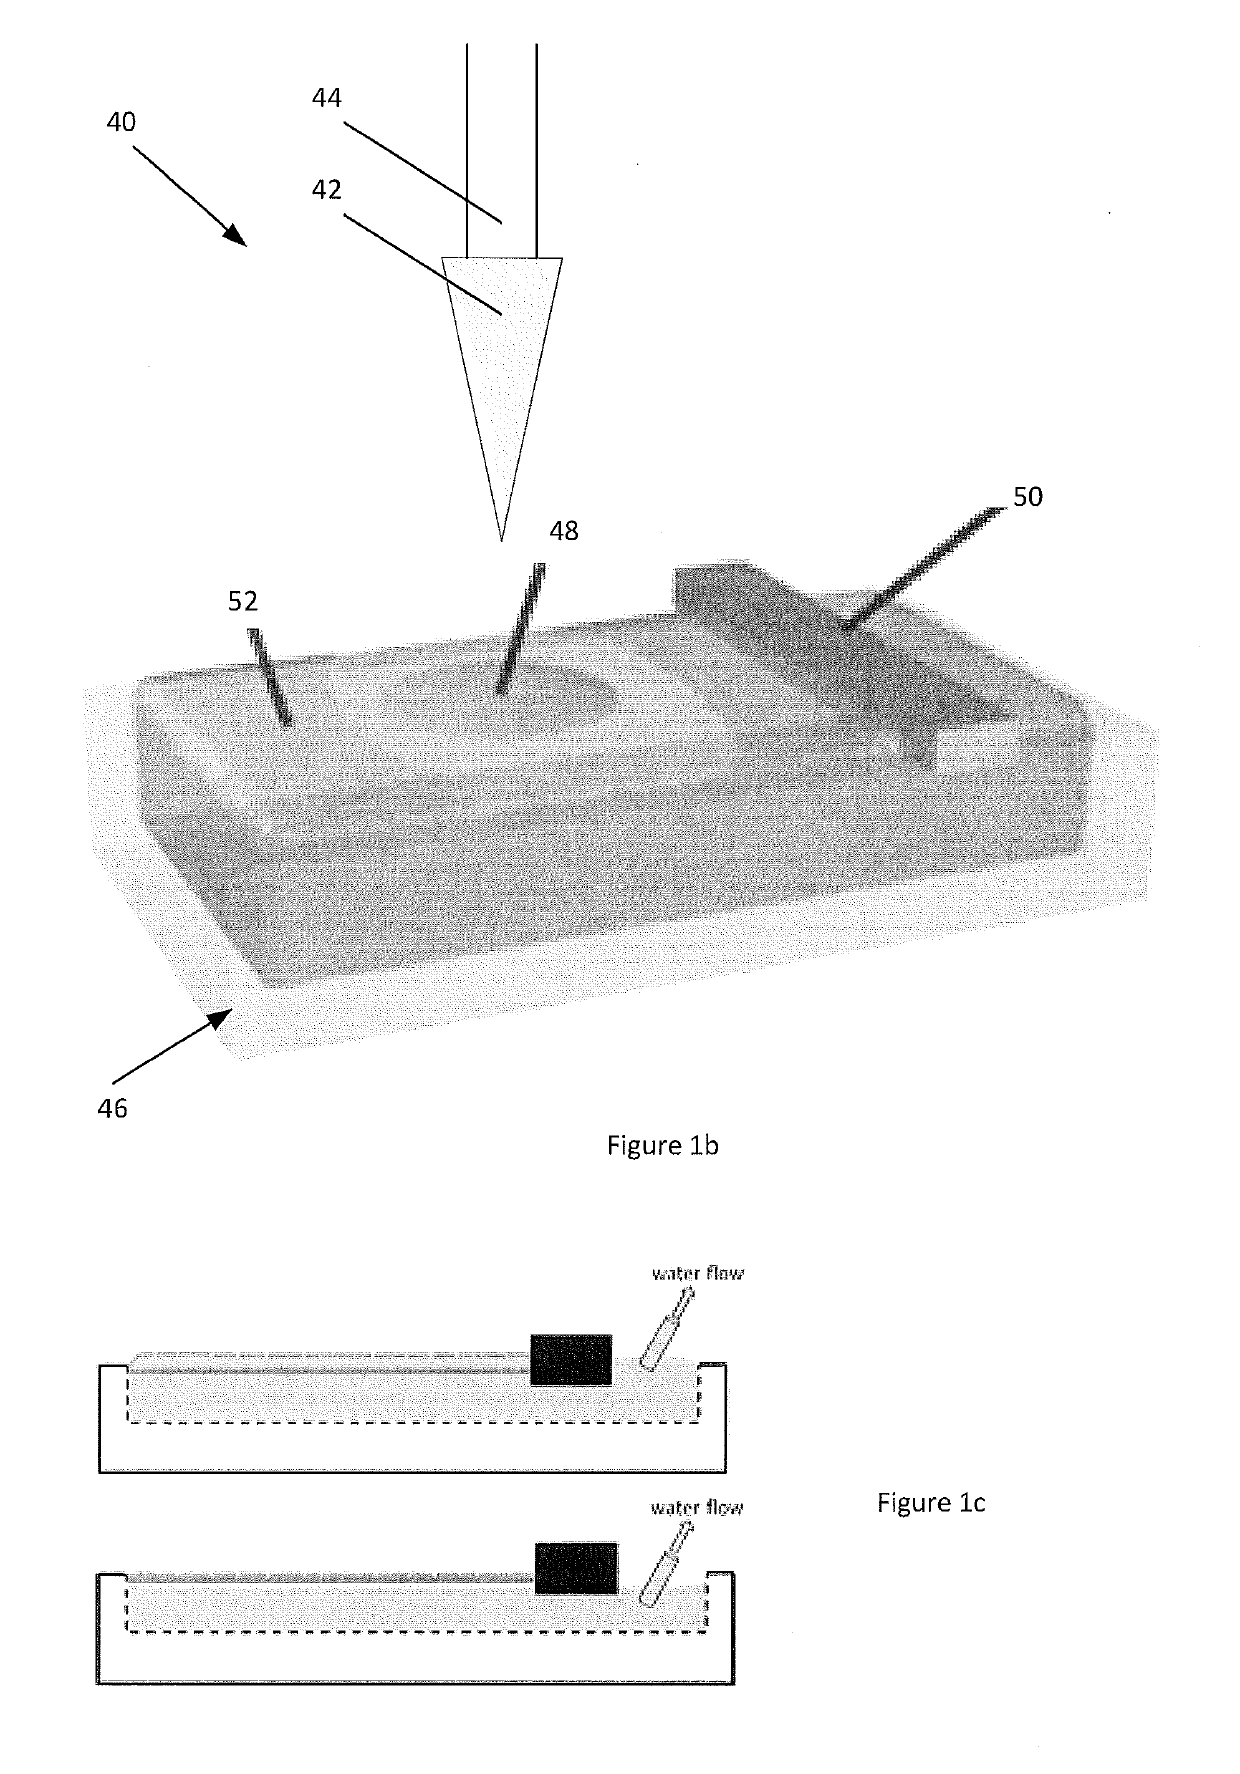 Method and apparatus for producing large-area monolayer films of solution dispersed nanomaterials